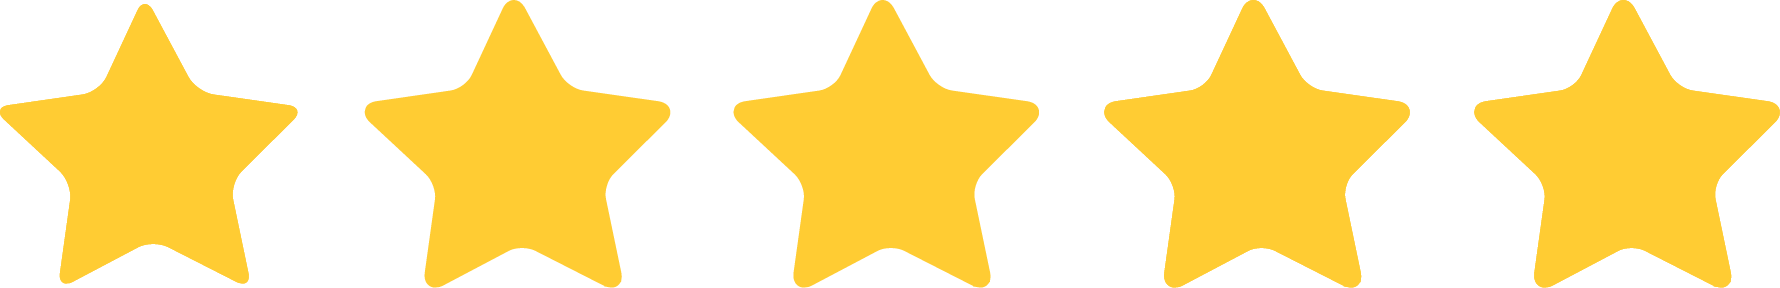 Image of 5 stars review